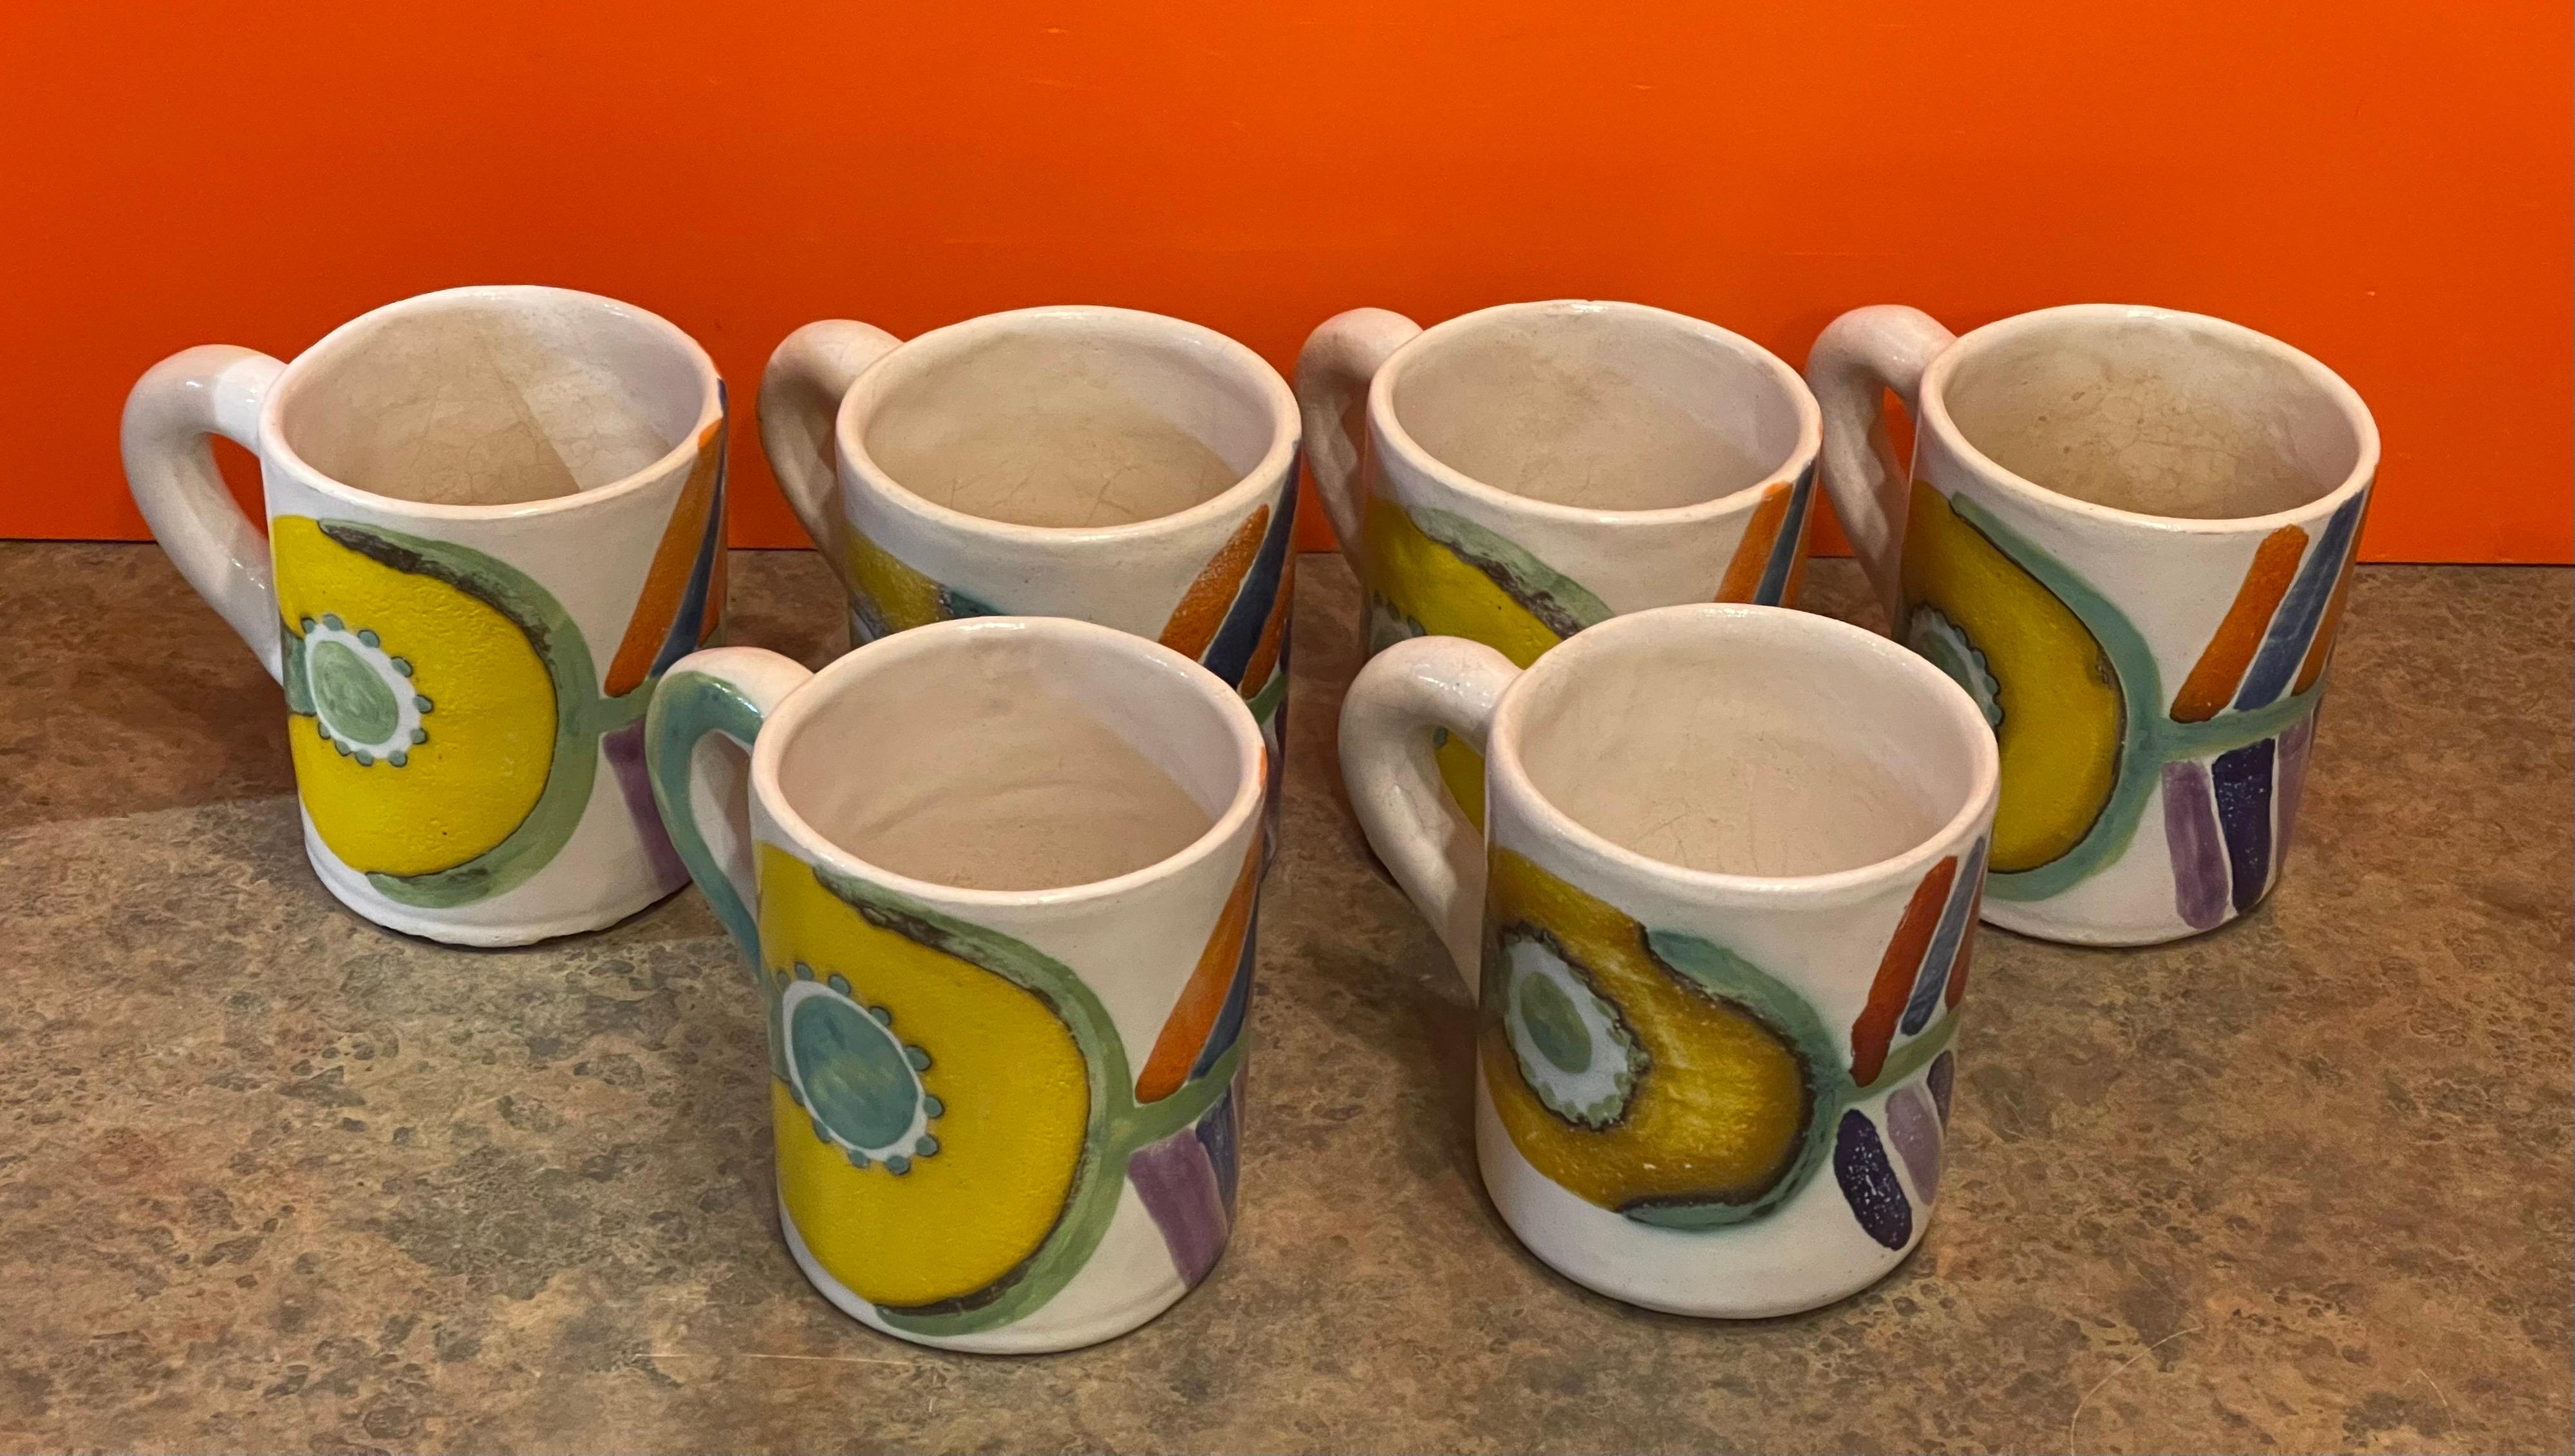 Set of 6 decorative hand painted Italian pottery mugs by DeSimone, circa 1960s. The mugs are in good vintage condition with a few small chips, some crazing and some discoloration to the inside of the mugs from coffee (please see pictures). They are